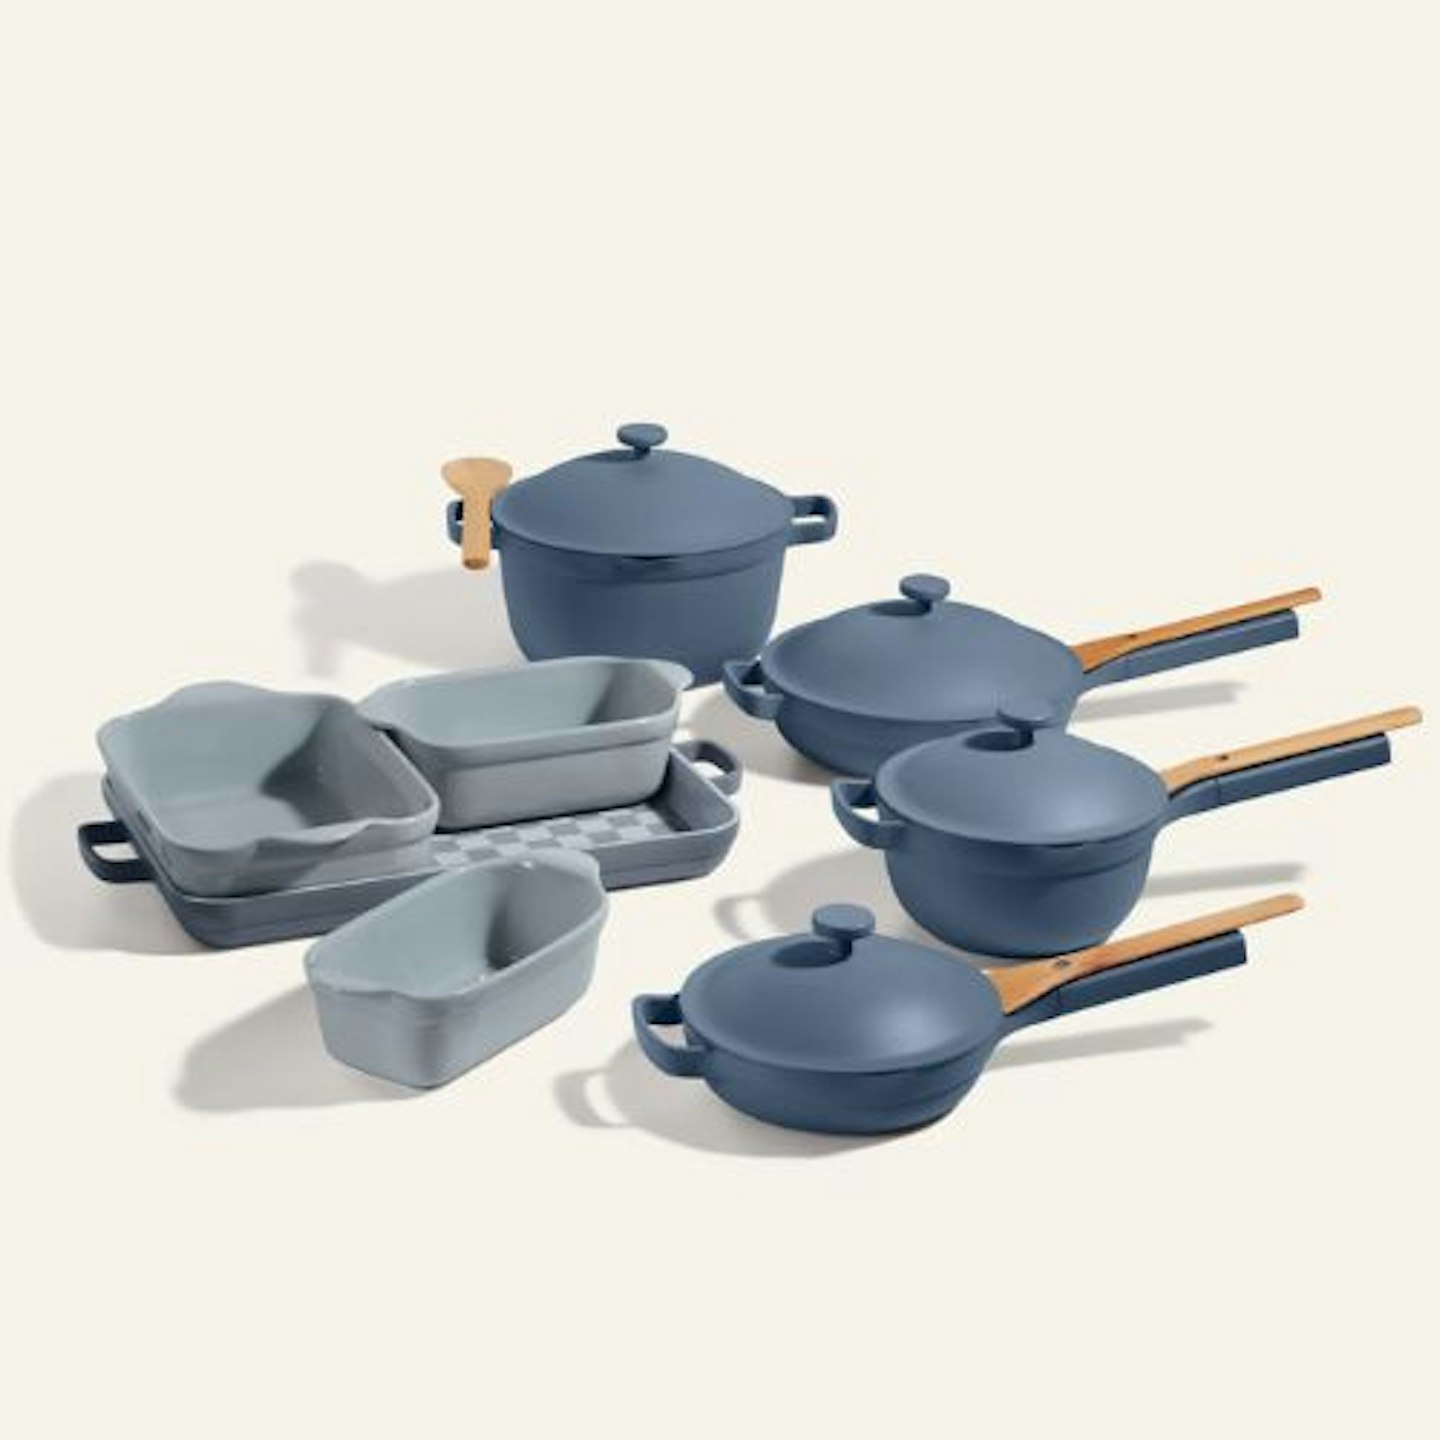 Our Place Ultimate Cookware Set